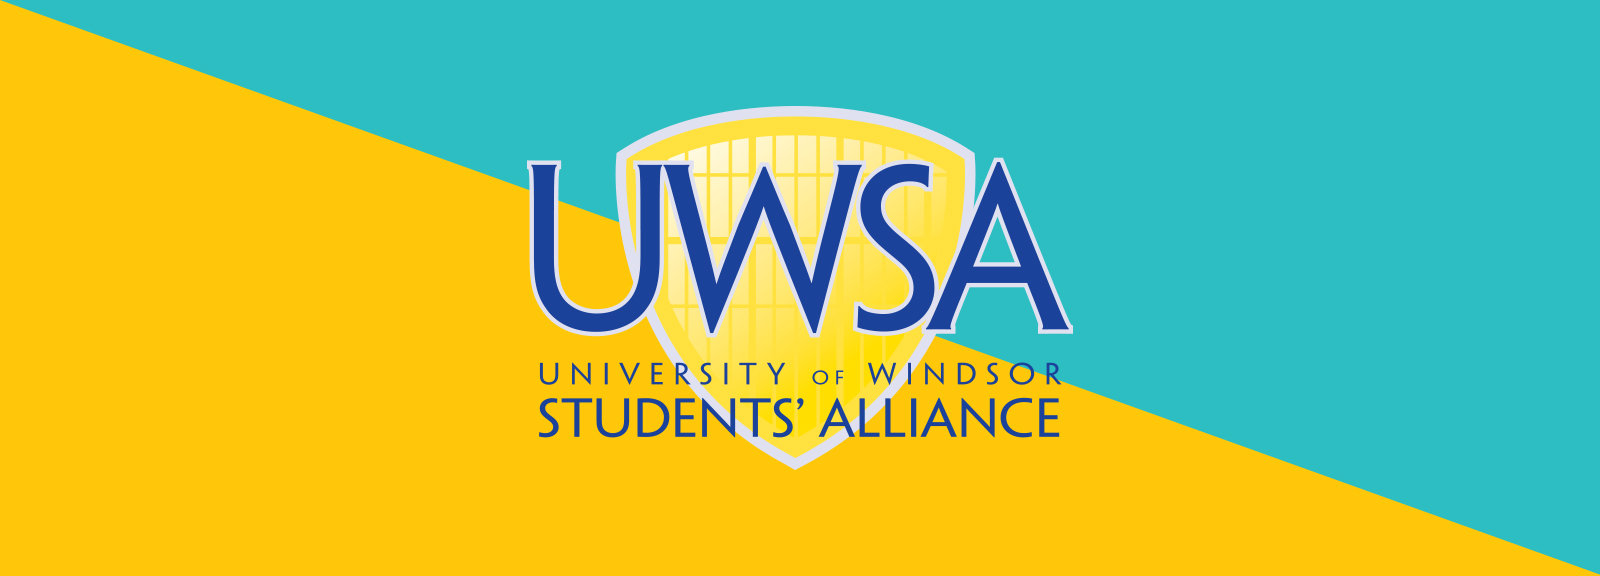 UWSA Recognizes the Ongoing Genocide of Palestinians and Calls for Justice